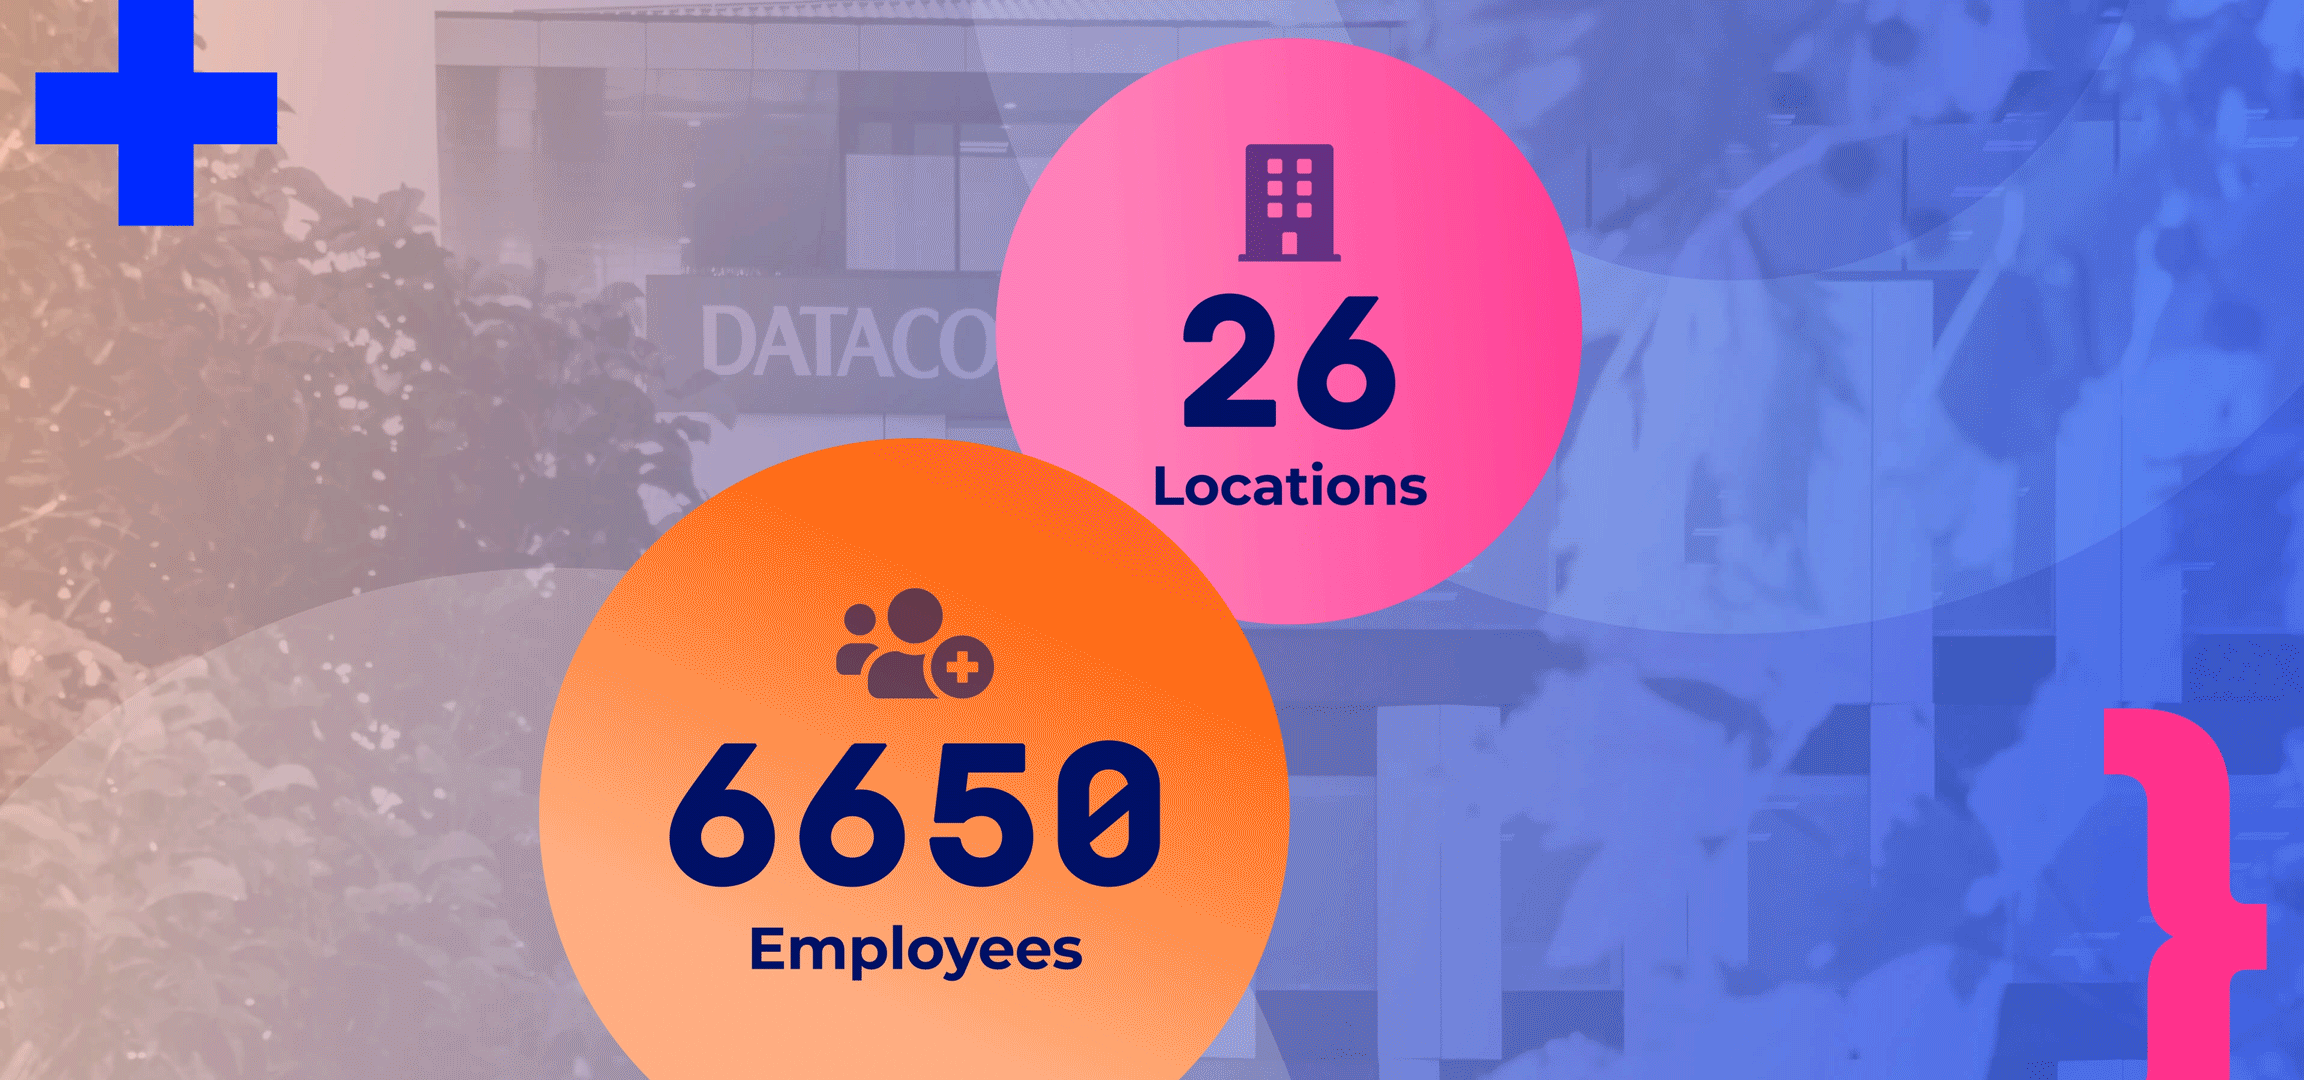 Number of employees and locations